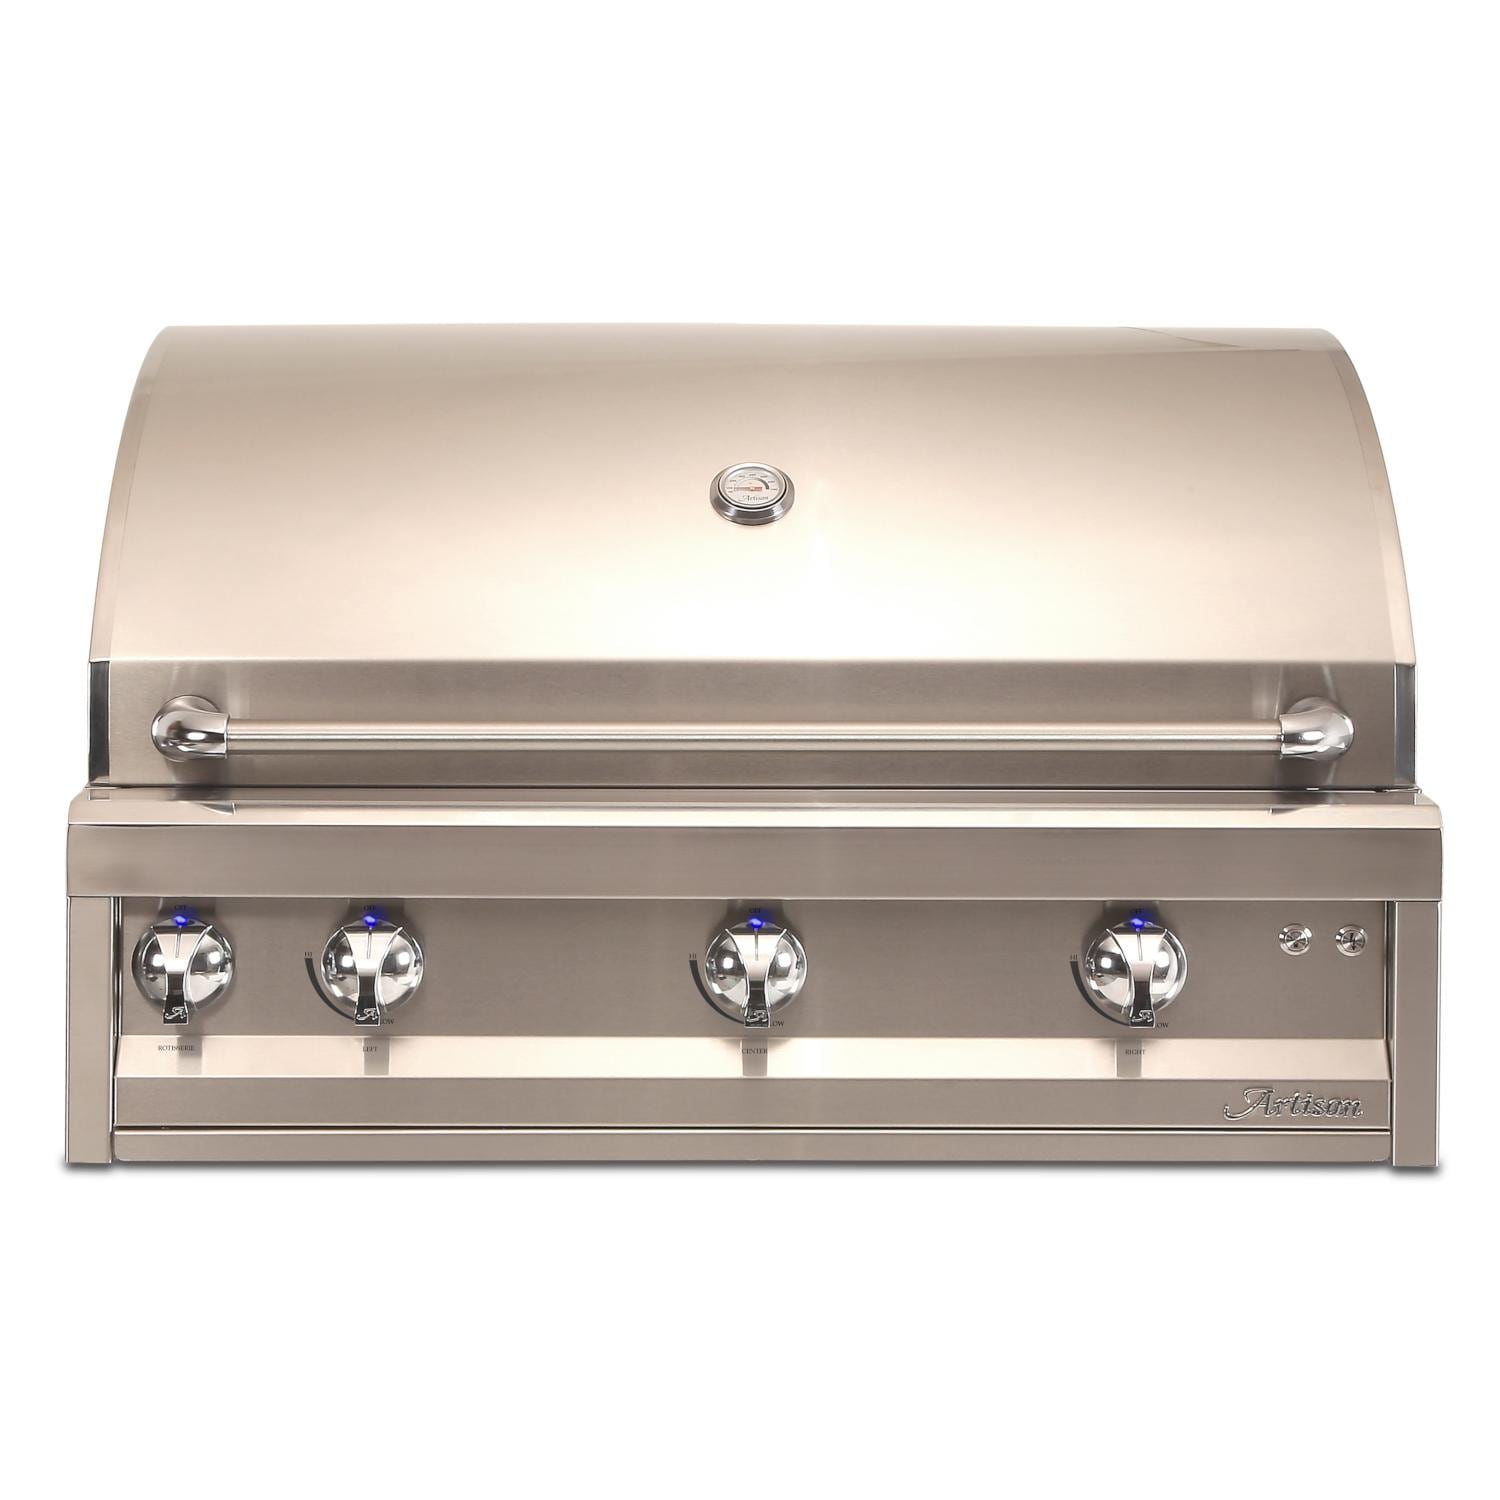 Artisan Professional 36-Inch 3-Burner Built-In Natural Gas Grill With Rotisserie - ARTP-36-NG - image 1 of 6